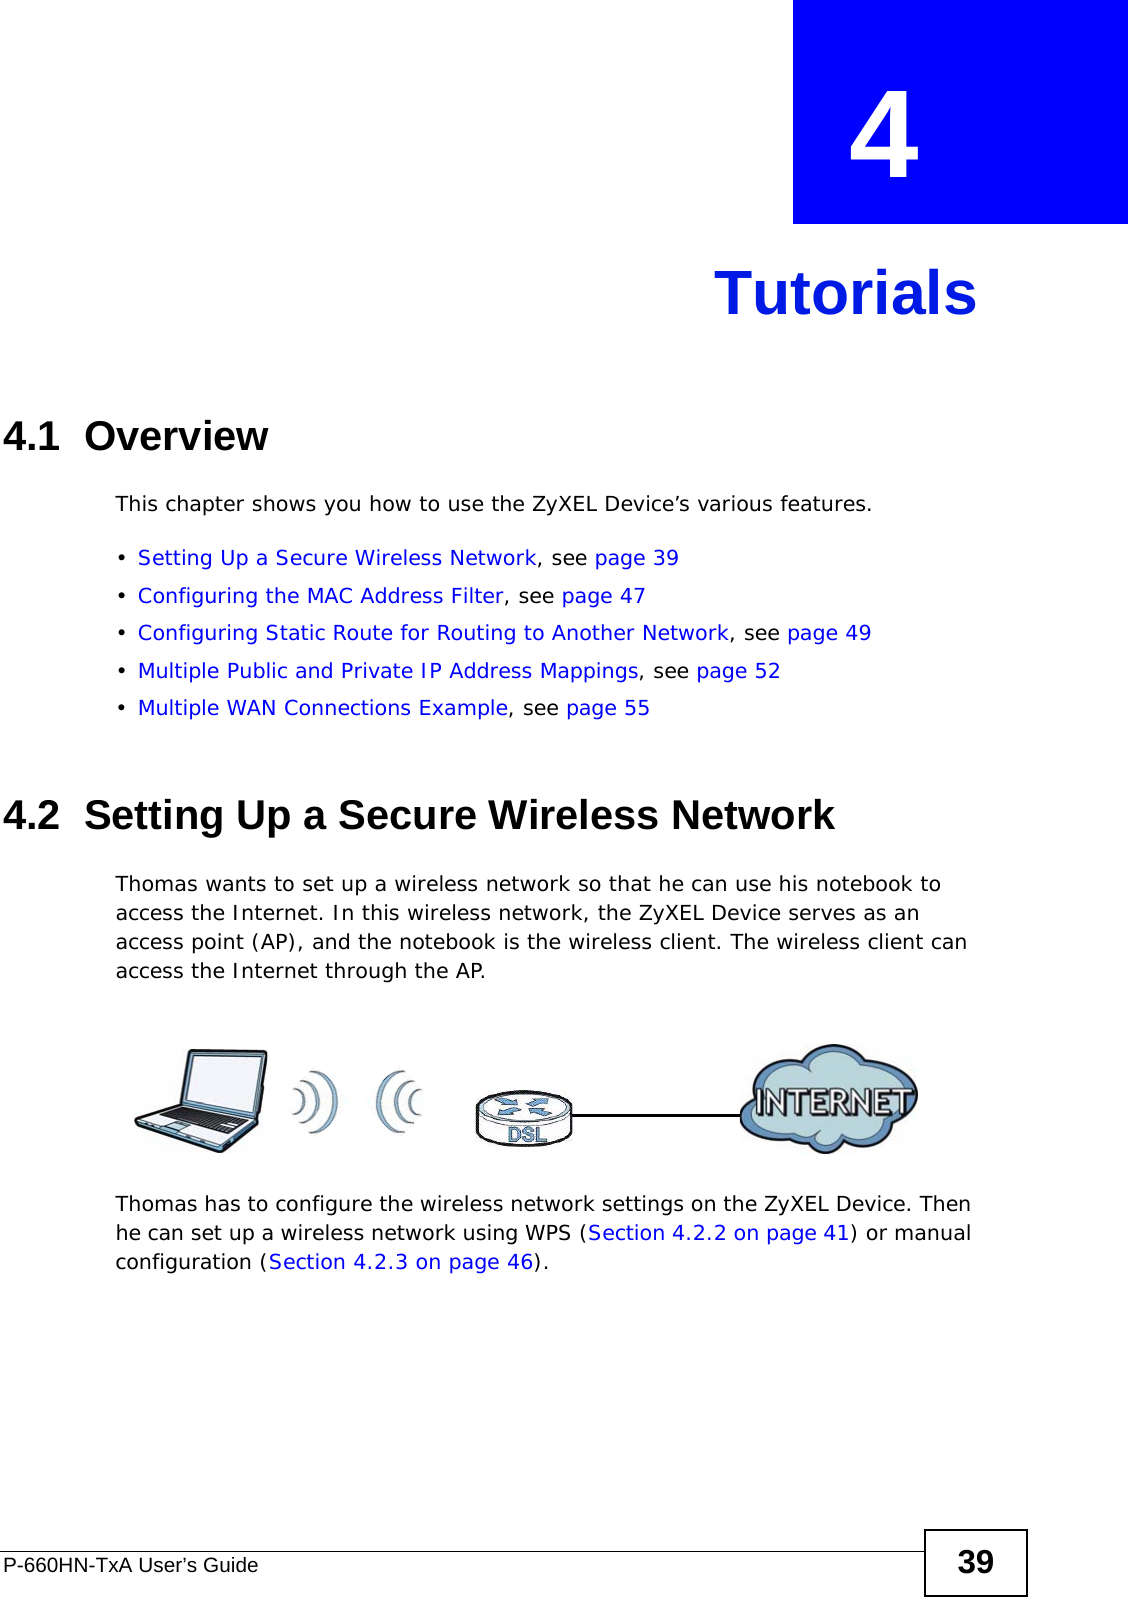 P-660HN-TxA User’s Guide 39CHAPTER  4 Tutorials4.1  OverviewThis chapter shows you how to use the ZyXEL Device’s various features.•Setting Up a Secure Wireless Network, see page 39•Configuring the MAC Address Filter, see page 47•Configuring Static Route for Routing to Another Network, see page 49•Multiple Public and Private IP Address Mappings, see page 52•Multiple WAN Connections Example, see page 554.2  Setting Up a Secure Wireless NetworkThomas wants to set up a wireless network so that he can use his notebook to access the Internet. In this wireless network, the ZyXEL Device serves as an access point (AP), and the notebook is the wireless client. The wireless client can access the Internet through the AP.Thomas has to configure the wireless network settings on the ZyXEL Device. Then he can set up a wireless network using WPS (Section 4.2.2 on page 41) or manual configuration (Section 4.2.3 on page 46).